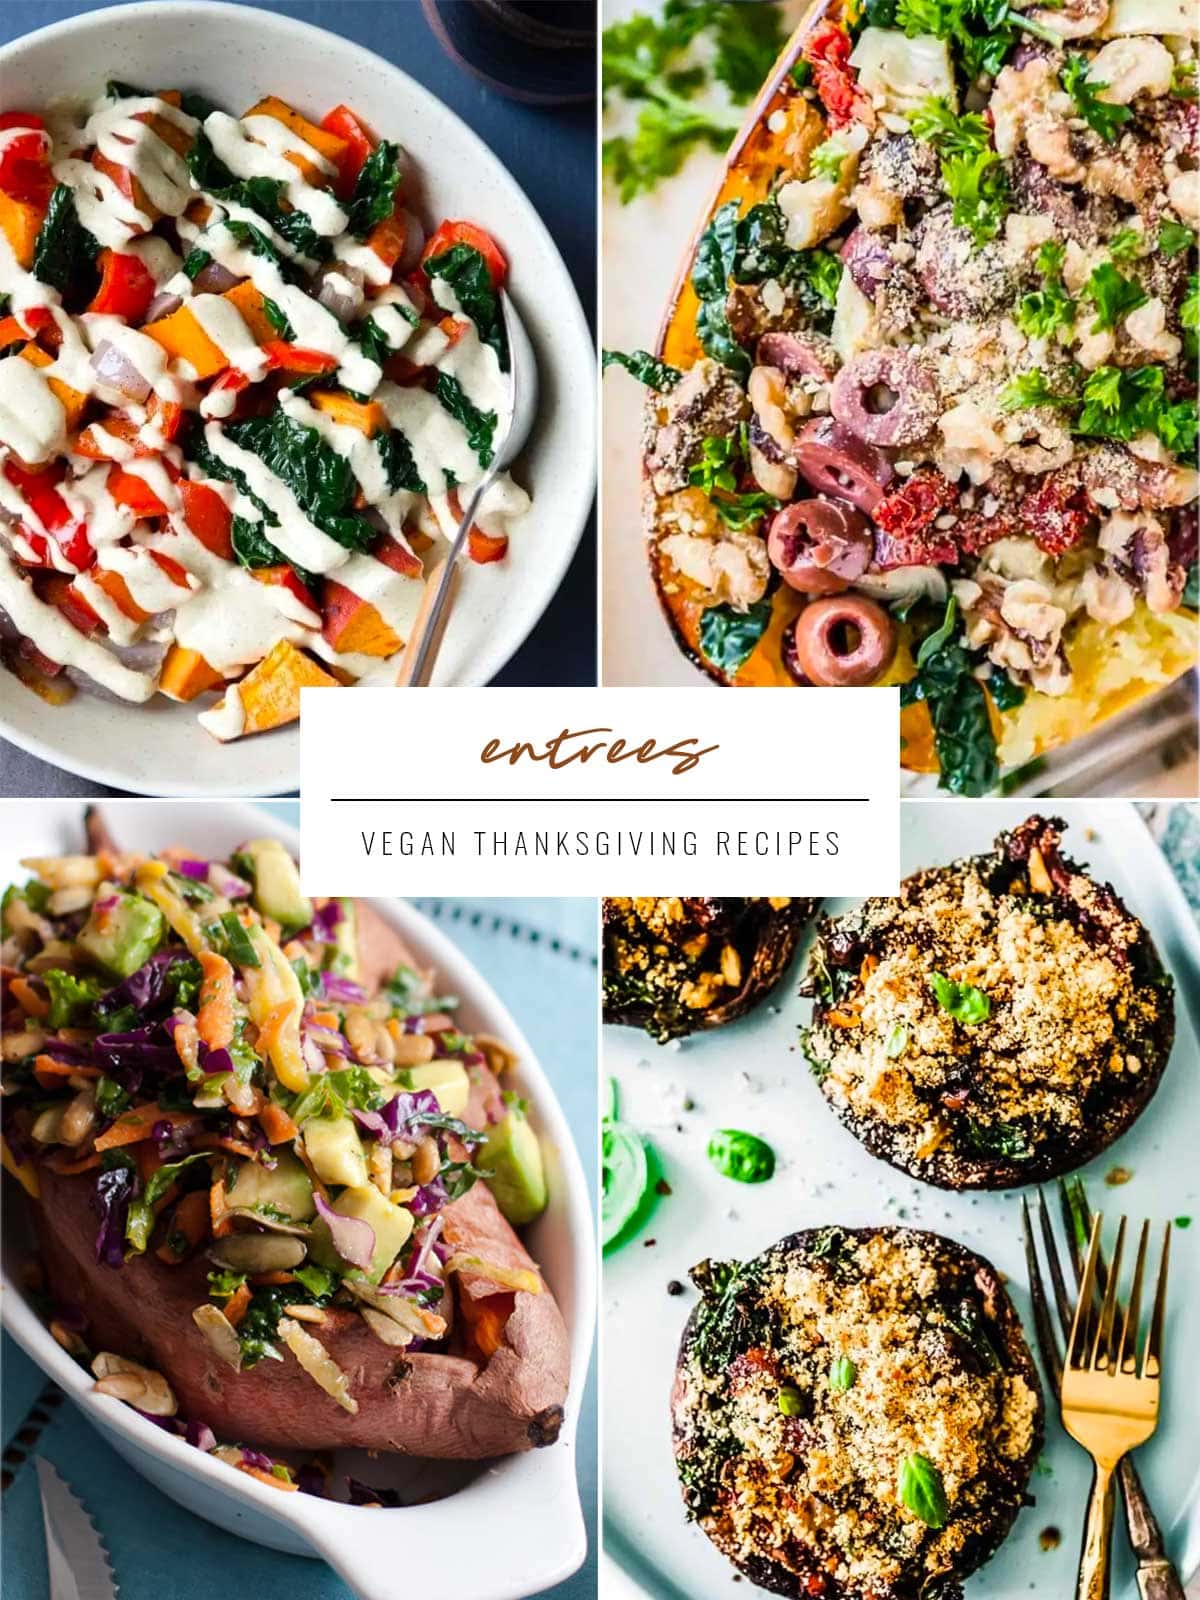 4 images with the words Entrees for Vegan Thanksgiving Main Dishes. Recipes include roasted veggies in hemp sauce, spaghetti squash, loaded sweet potato and stuffed portobello mushrooms